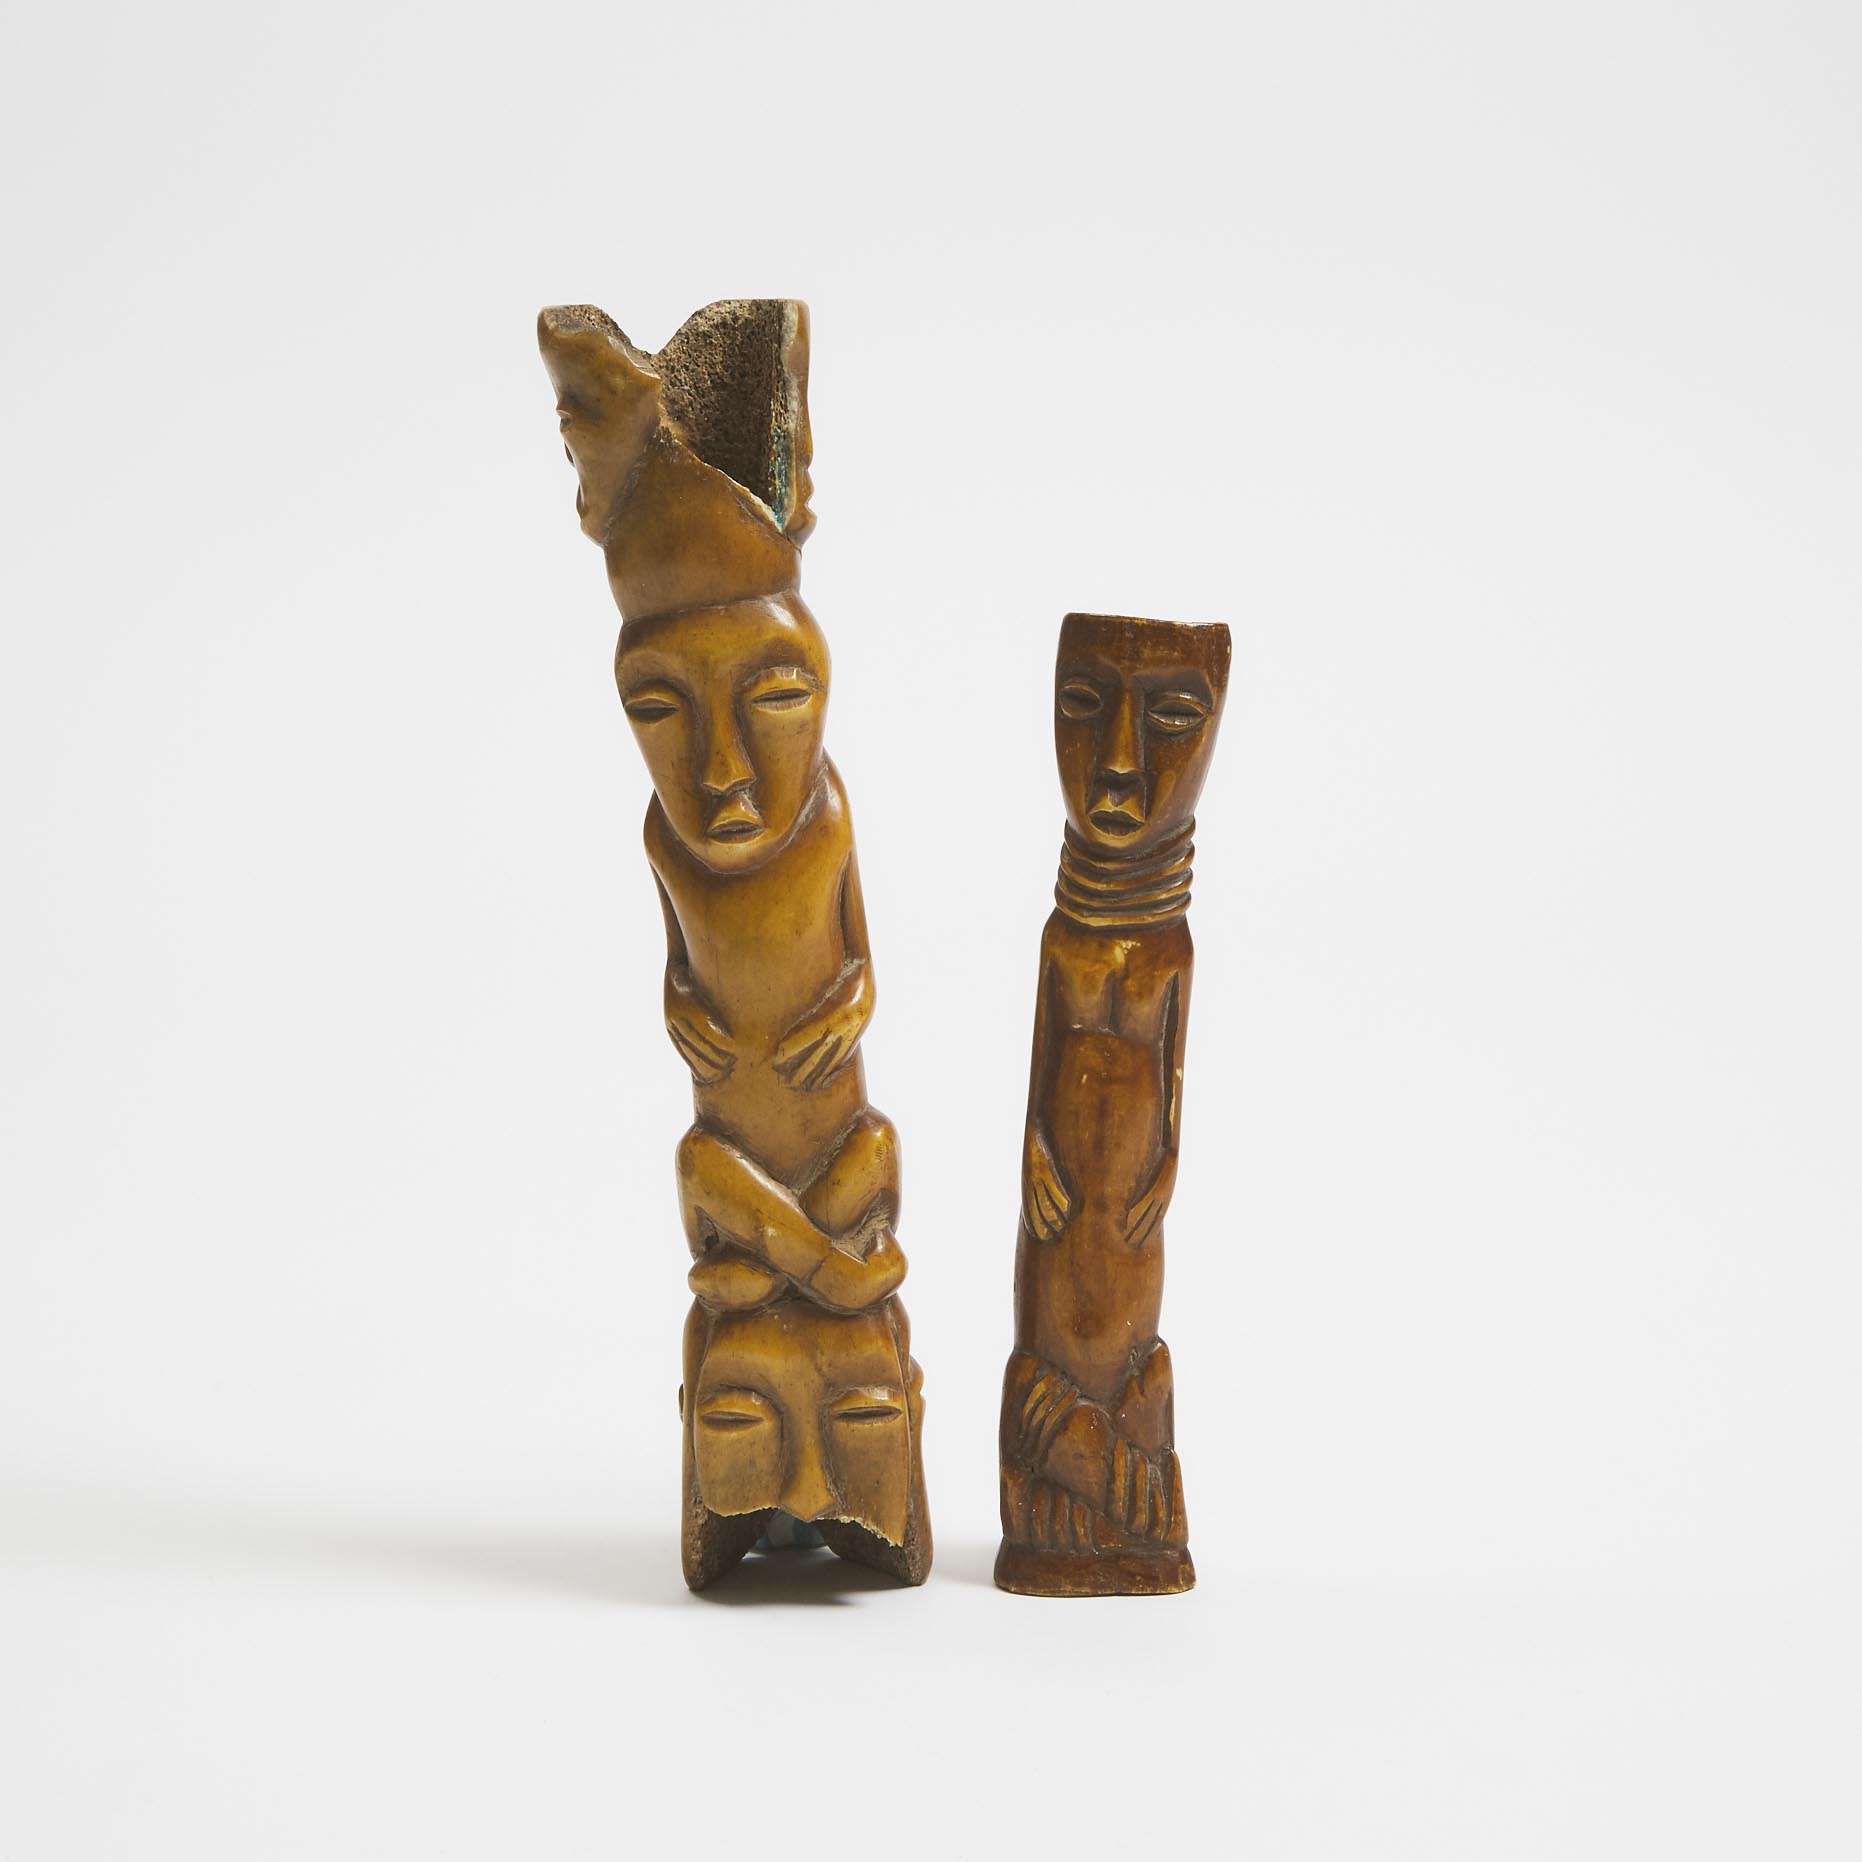 Lega Carved Bone Totem and Female figure, Democratic Republic of Congo, Central Africa, late 19th to early 20th century